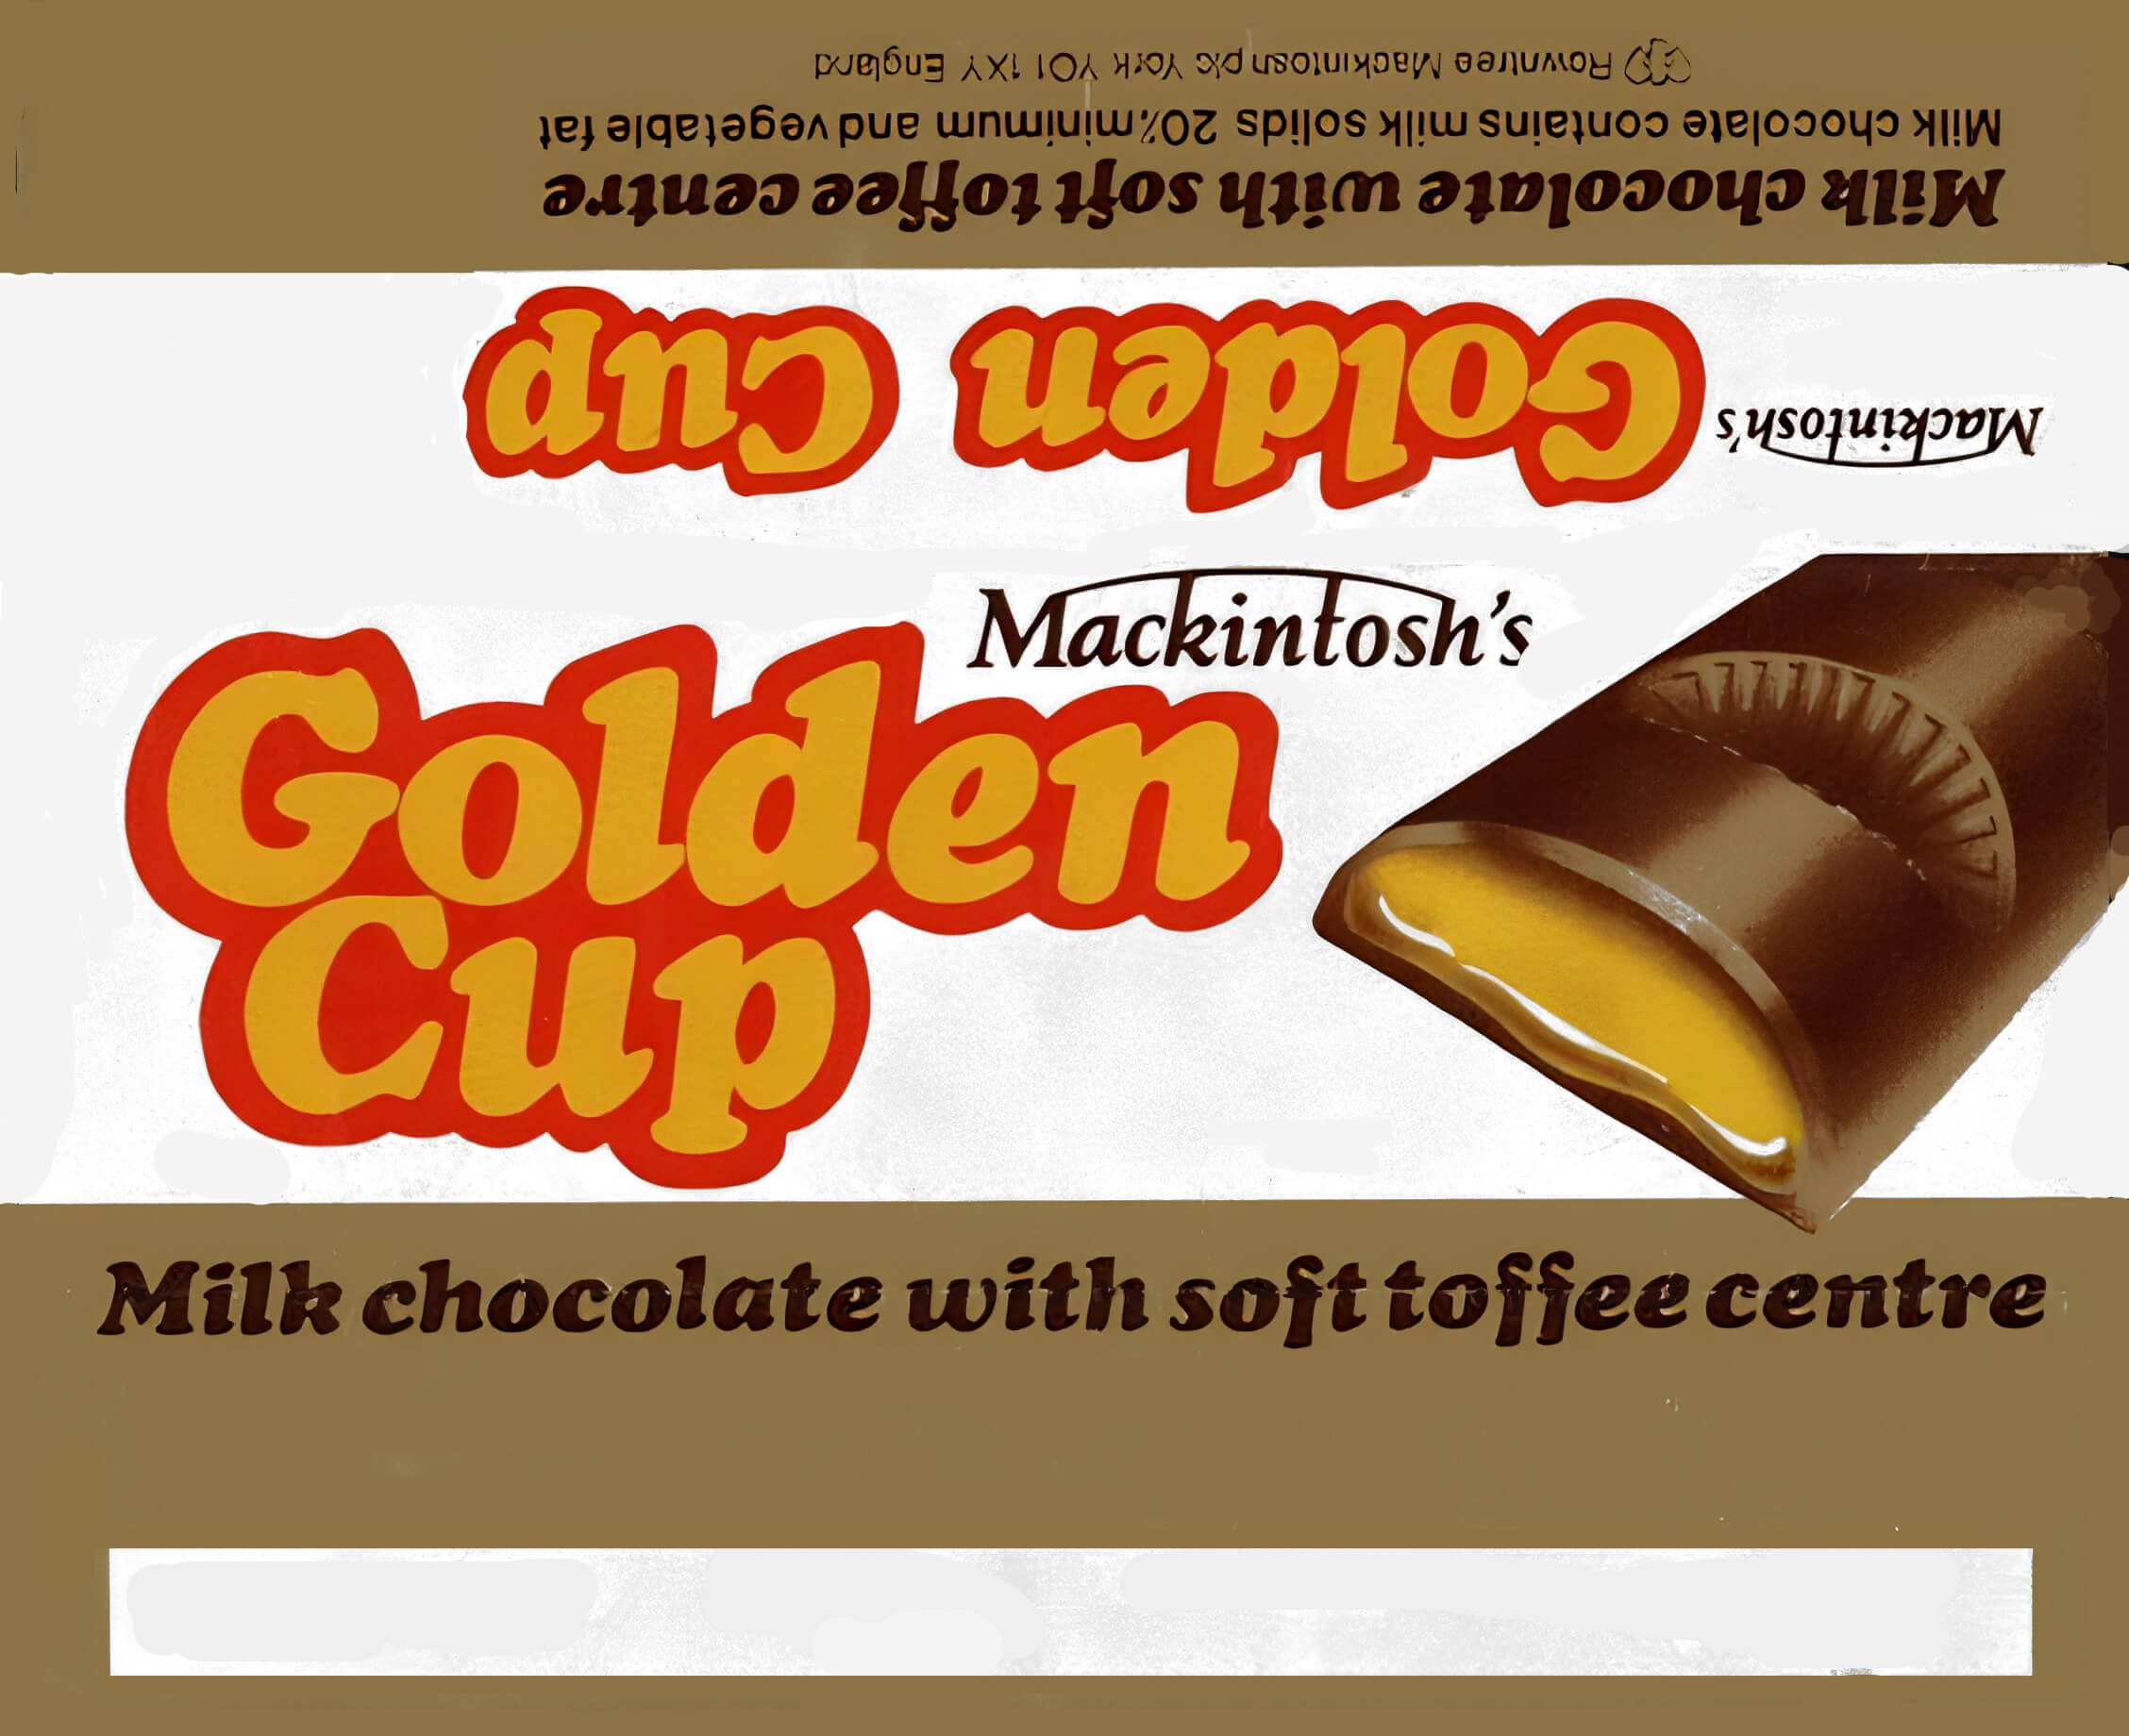 Mackintosh's Golden Cup wrapper. White an gold with yellow text logo and red surround